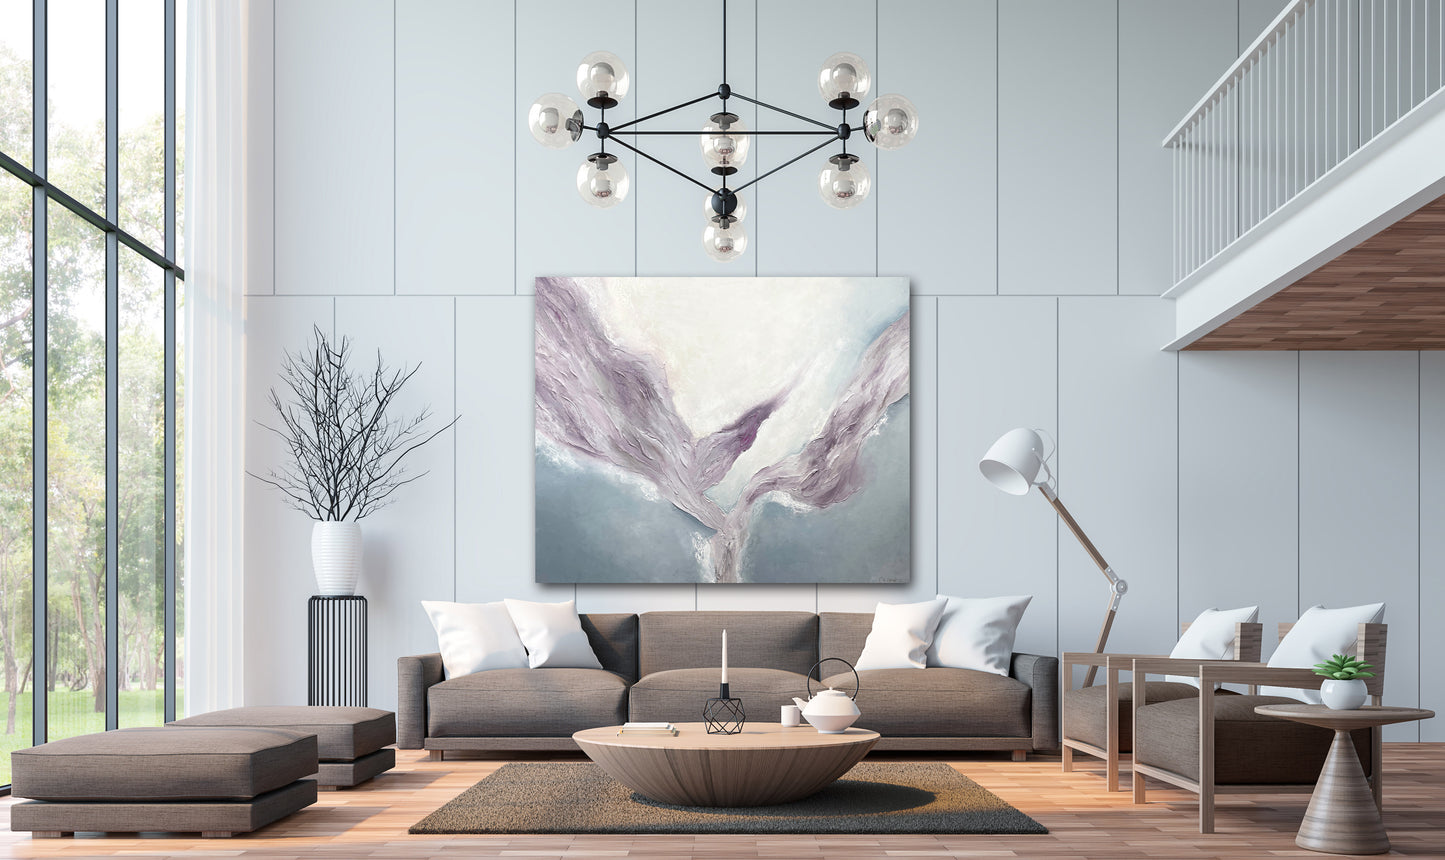 Whisk Me Away  60" X 72" - SOLD